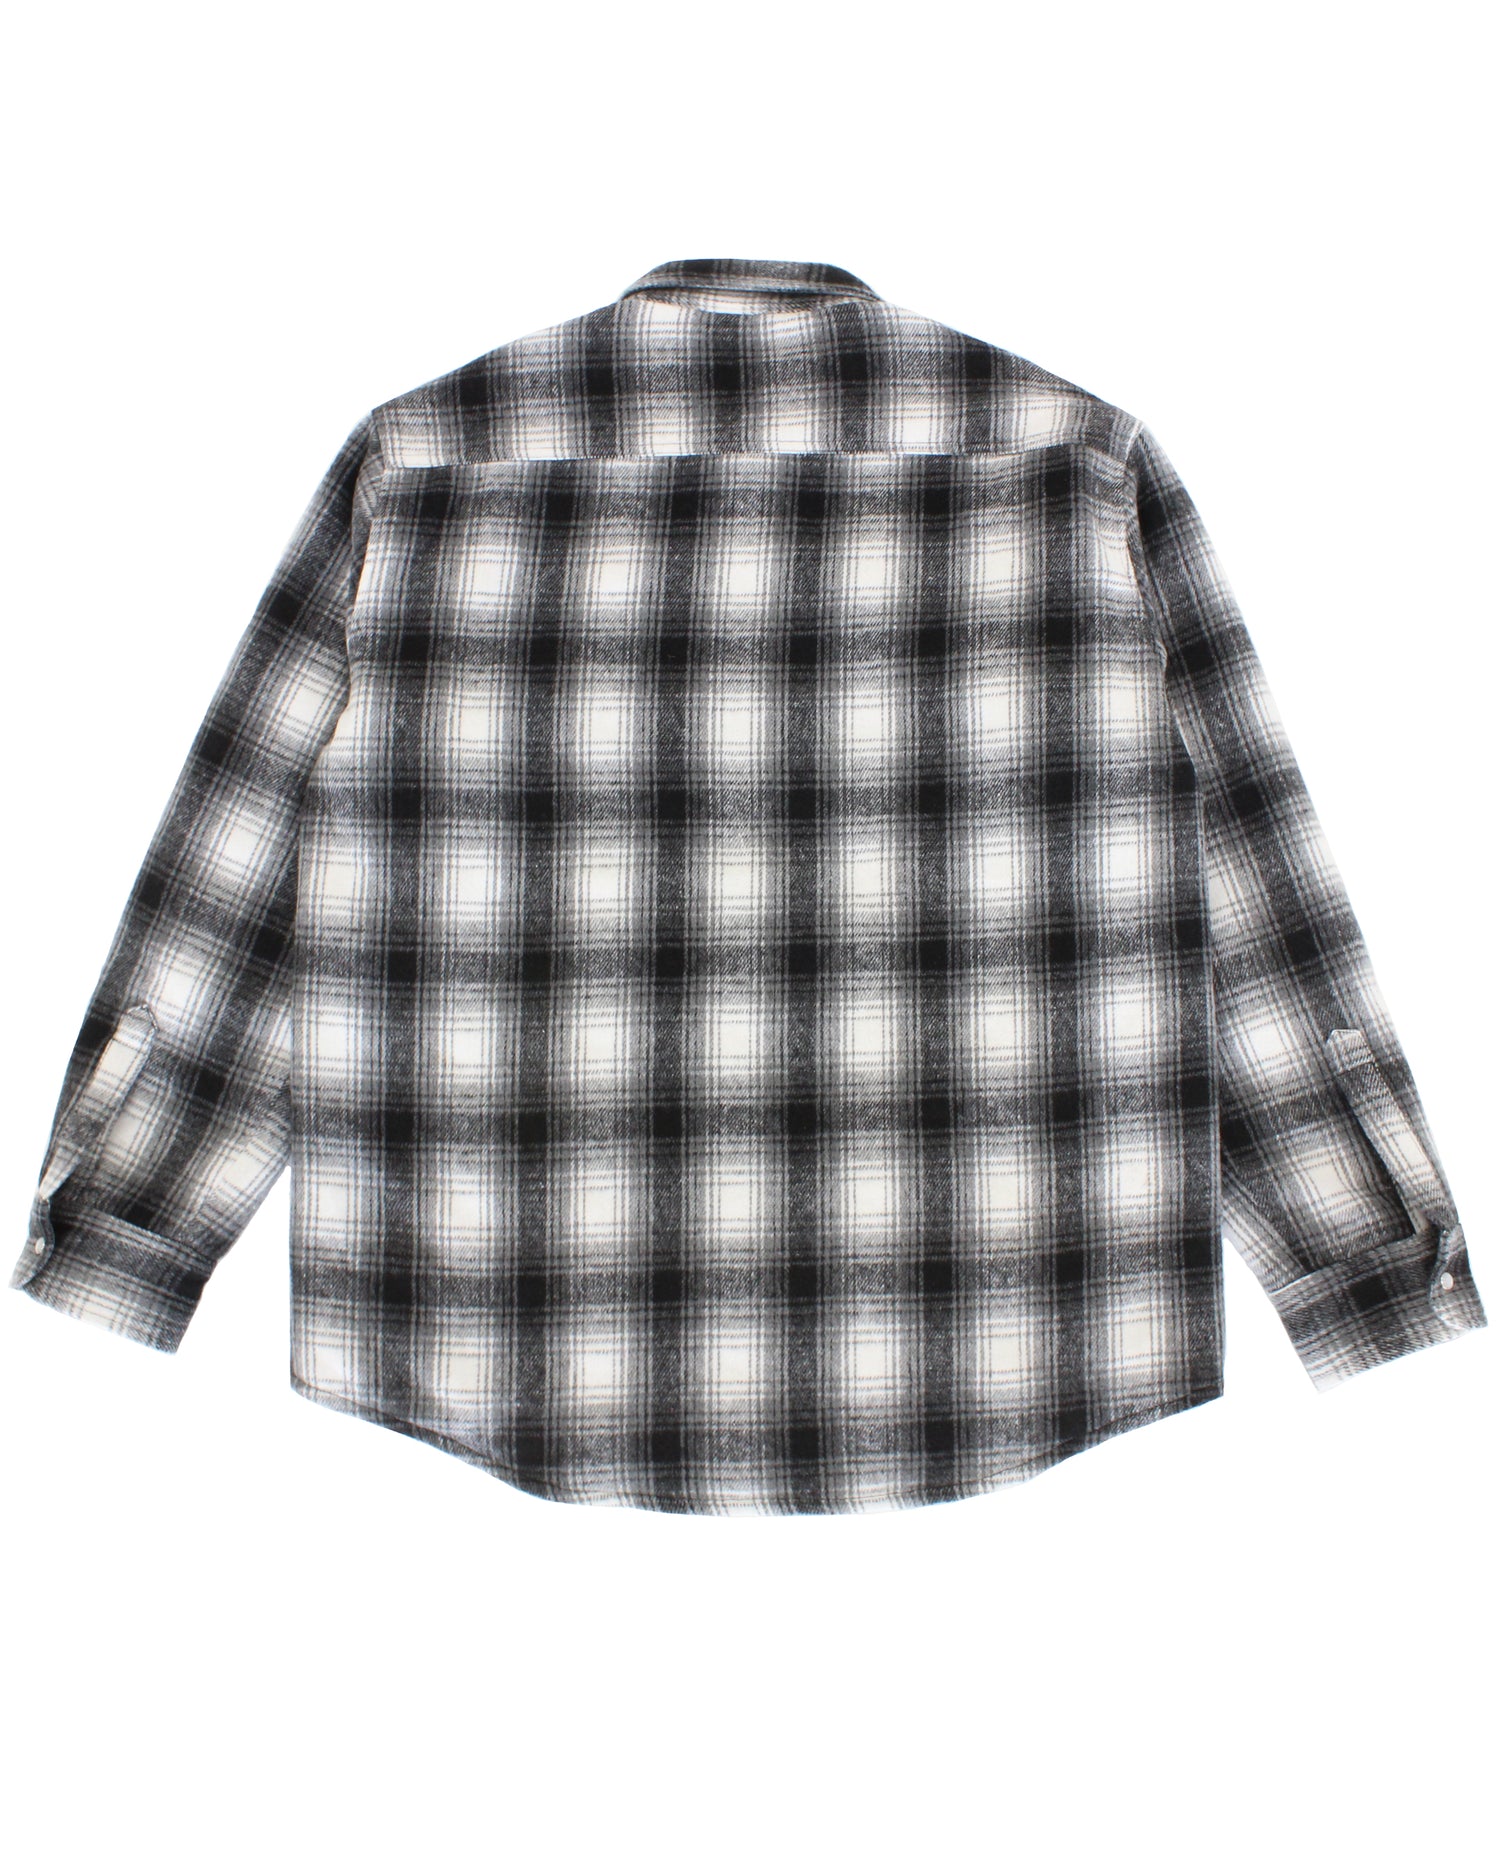 TAHOE QUILTED FLANNEL - GREY